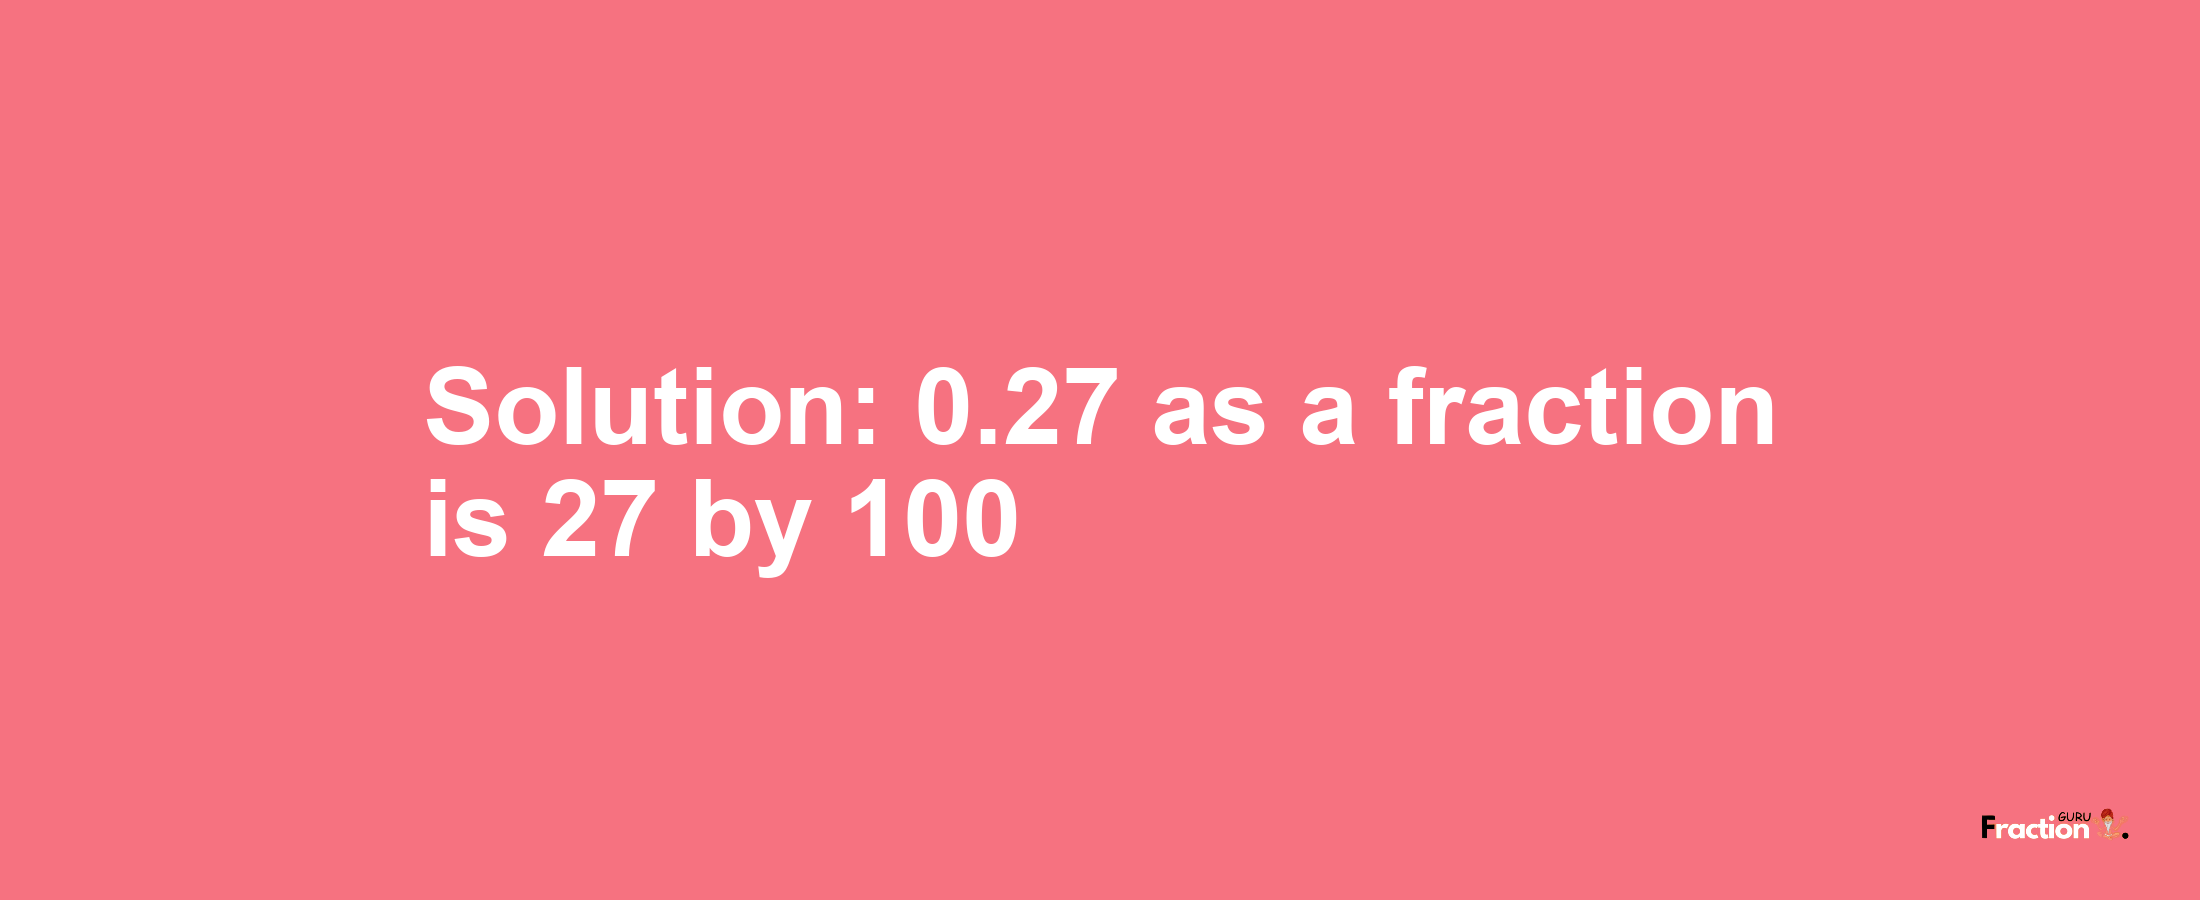 Solution:0.27 as a fraction is 27/100